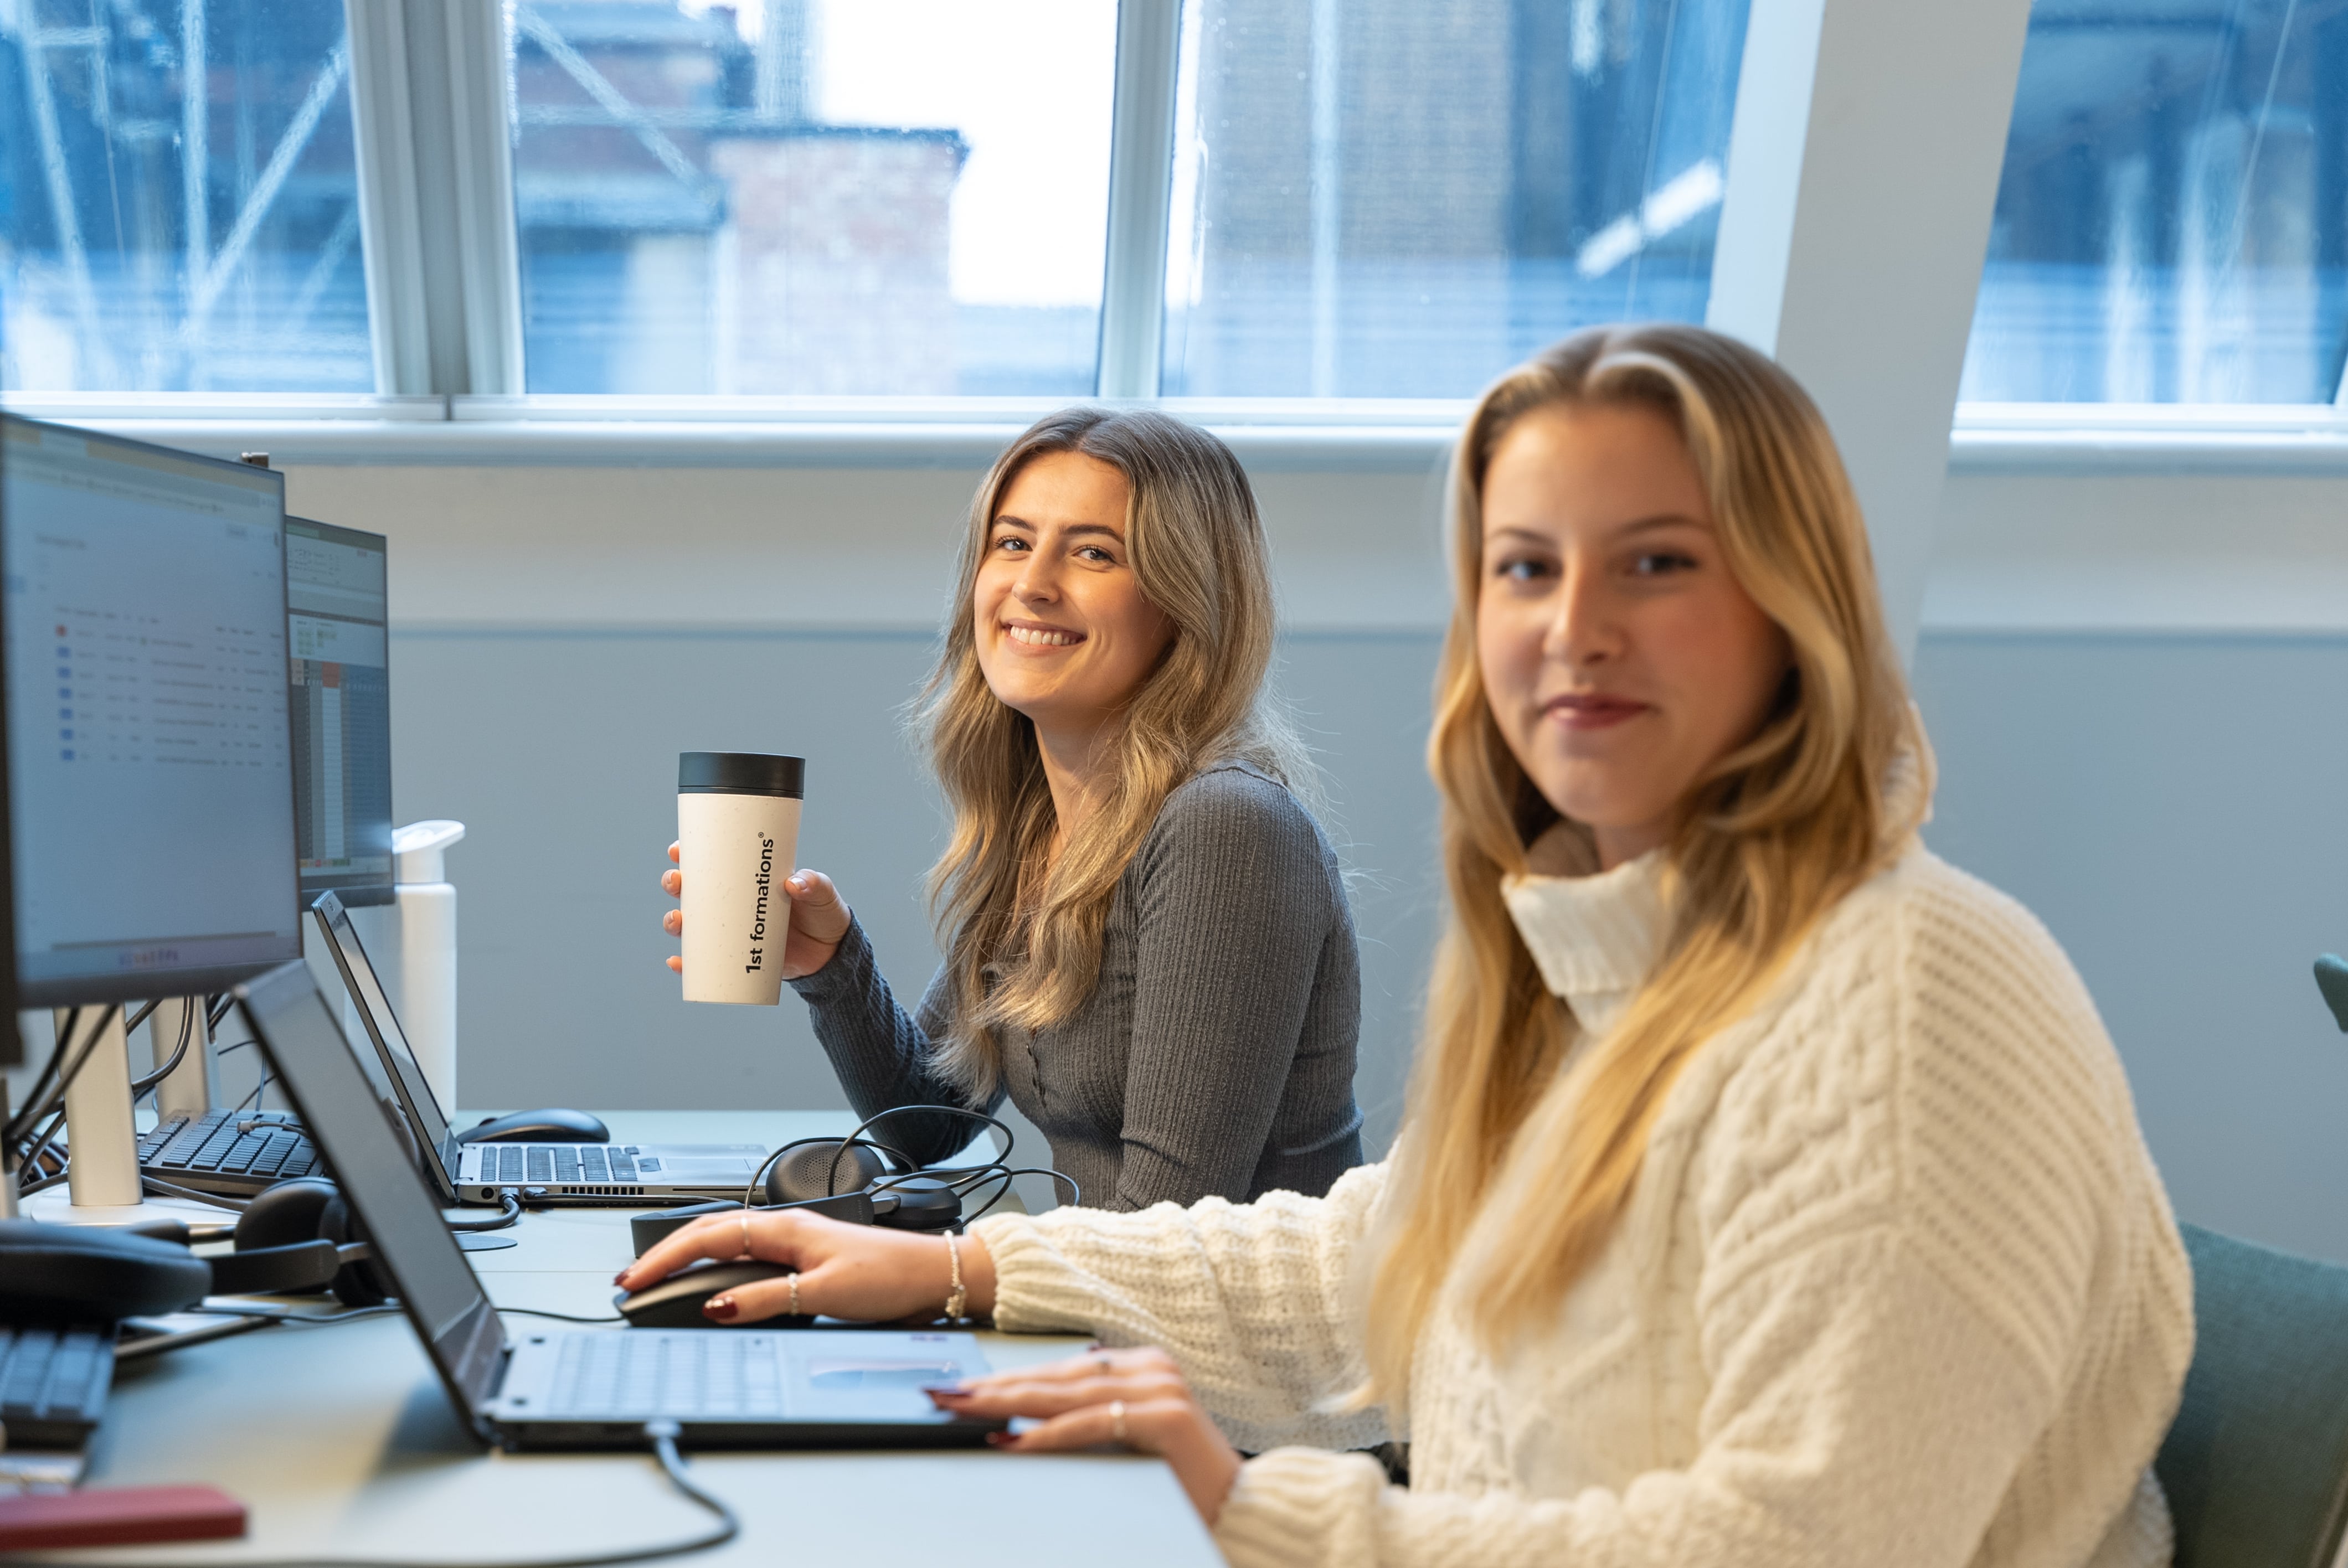 Hannah and Jodie, from our Customer Retention Team, smiling and sitting at their desks.